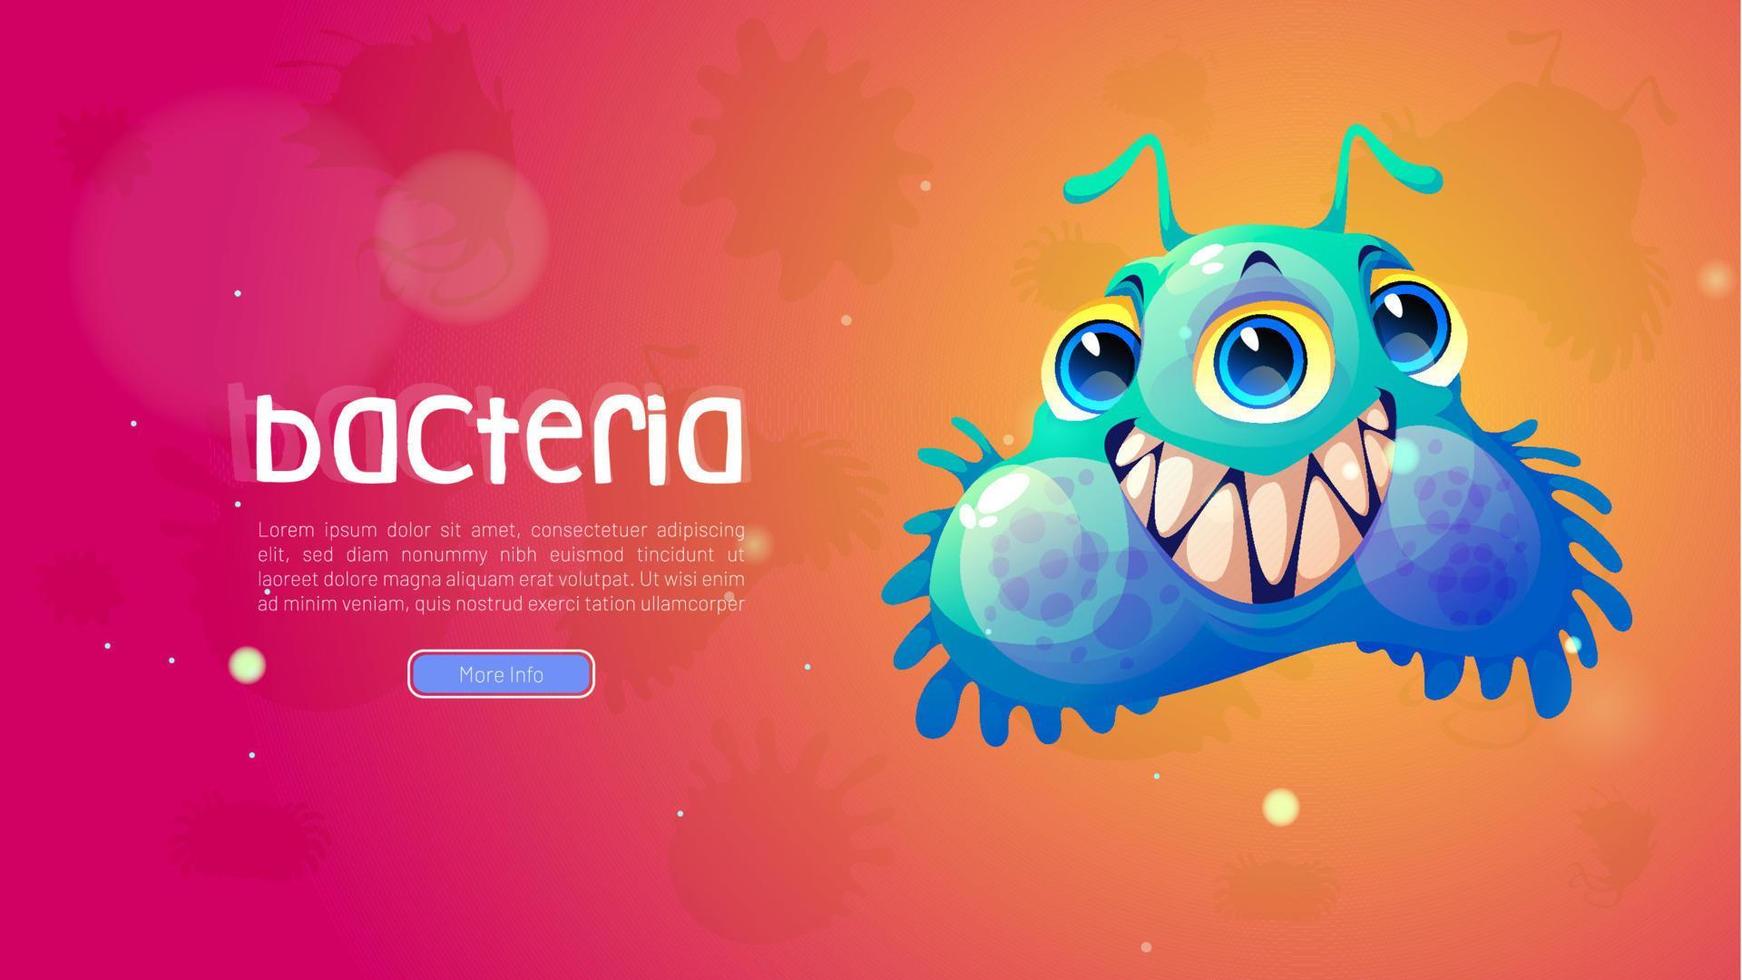 Bacteria poster with funny virus character vector